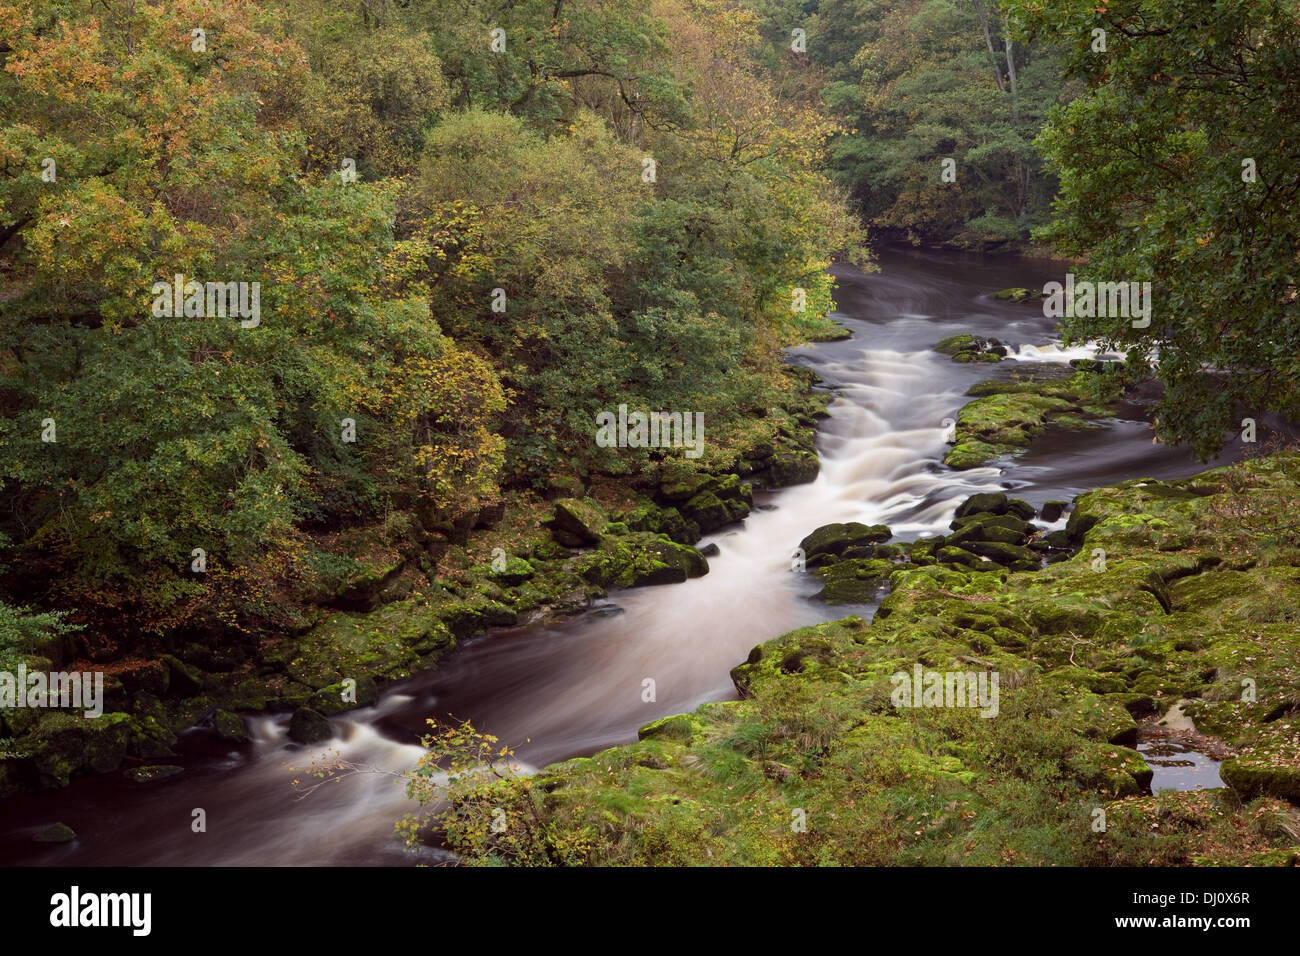 Strid Wood and the River Wharfe, Bolton Abbey, Wharfedale, Yorkshire Dales National Park, England, UK. October 2013. Stock Photo